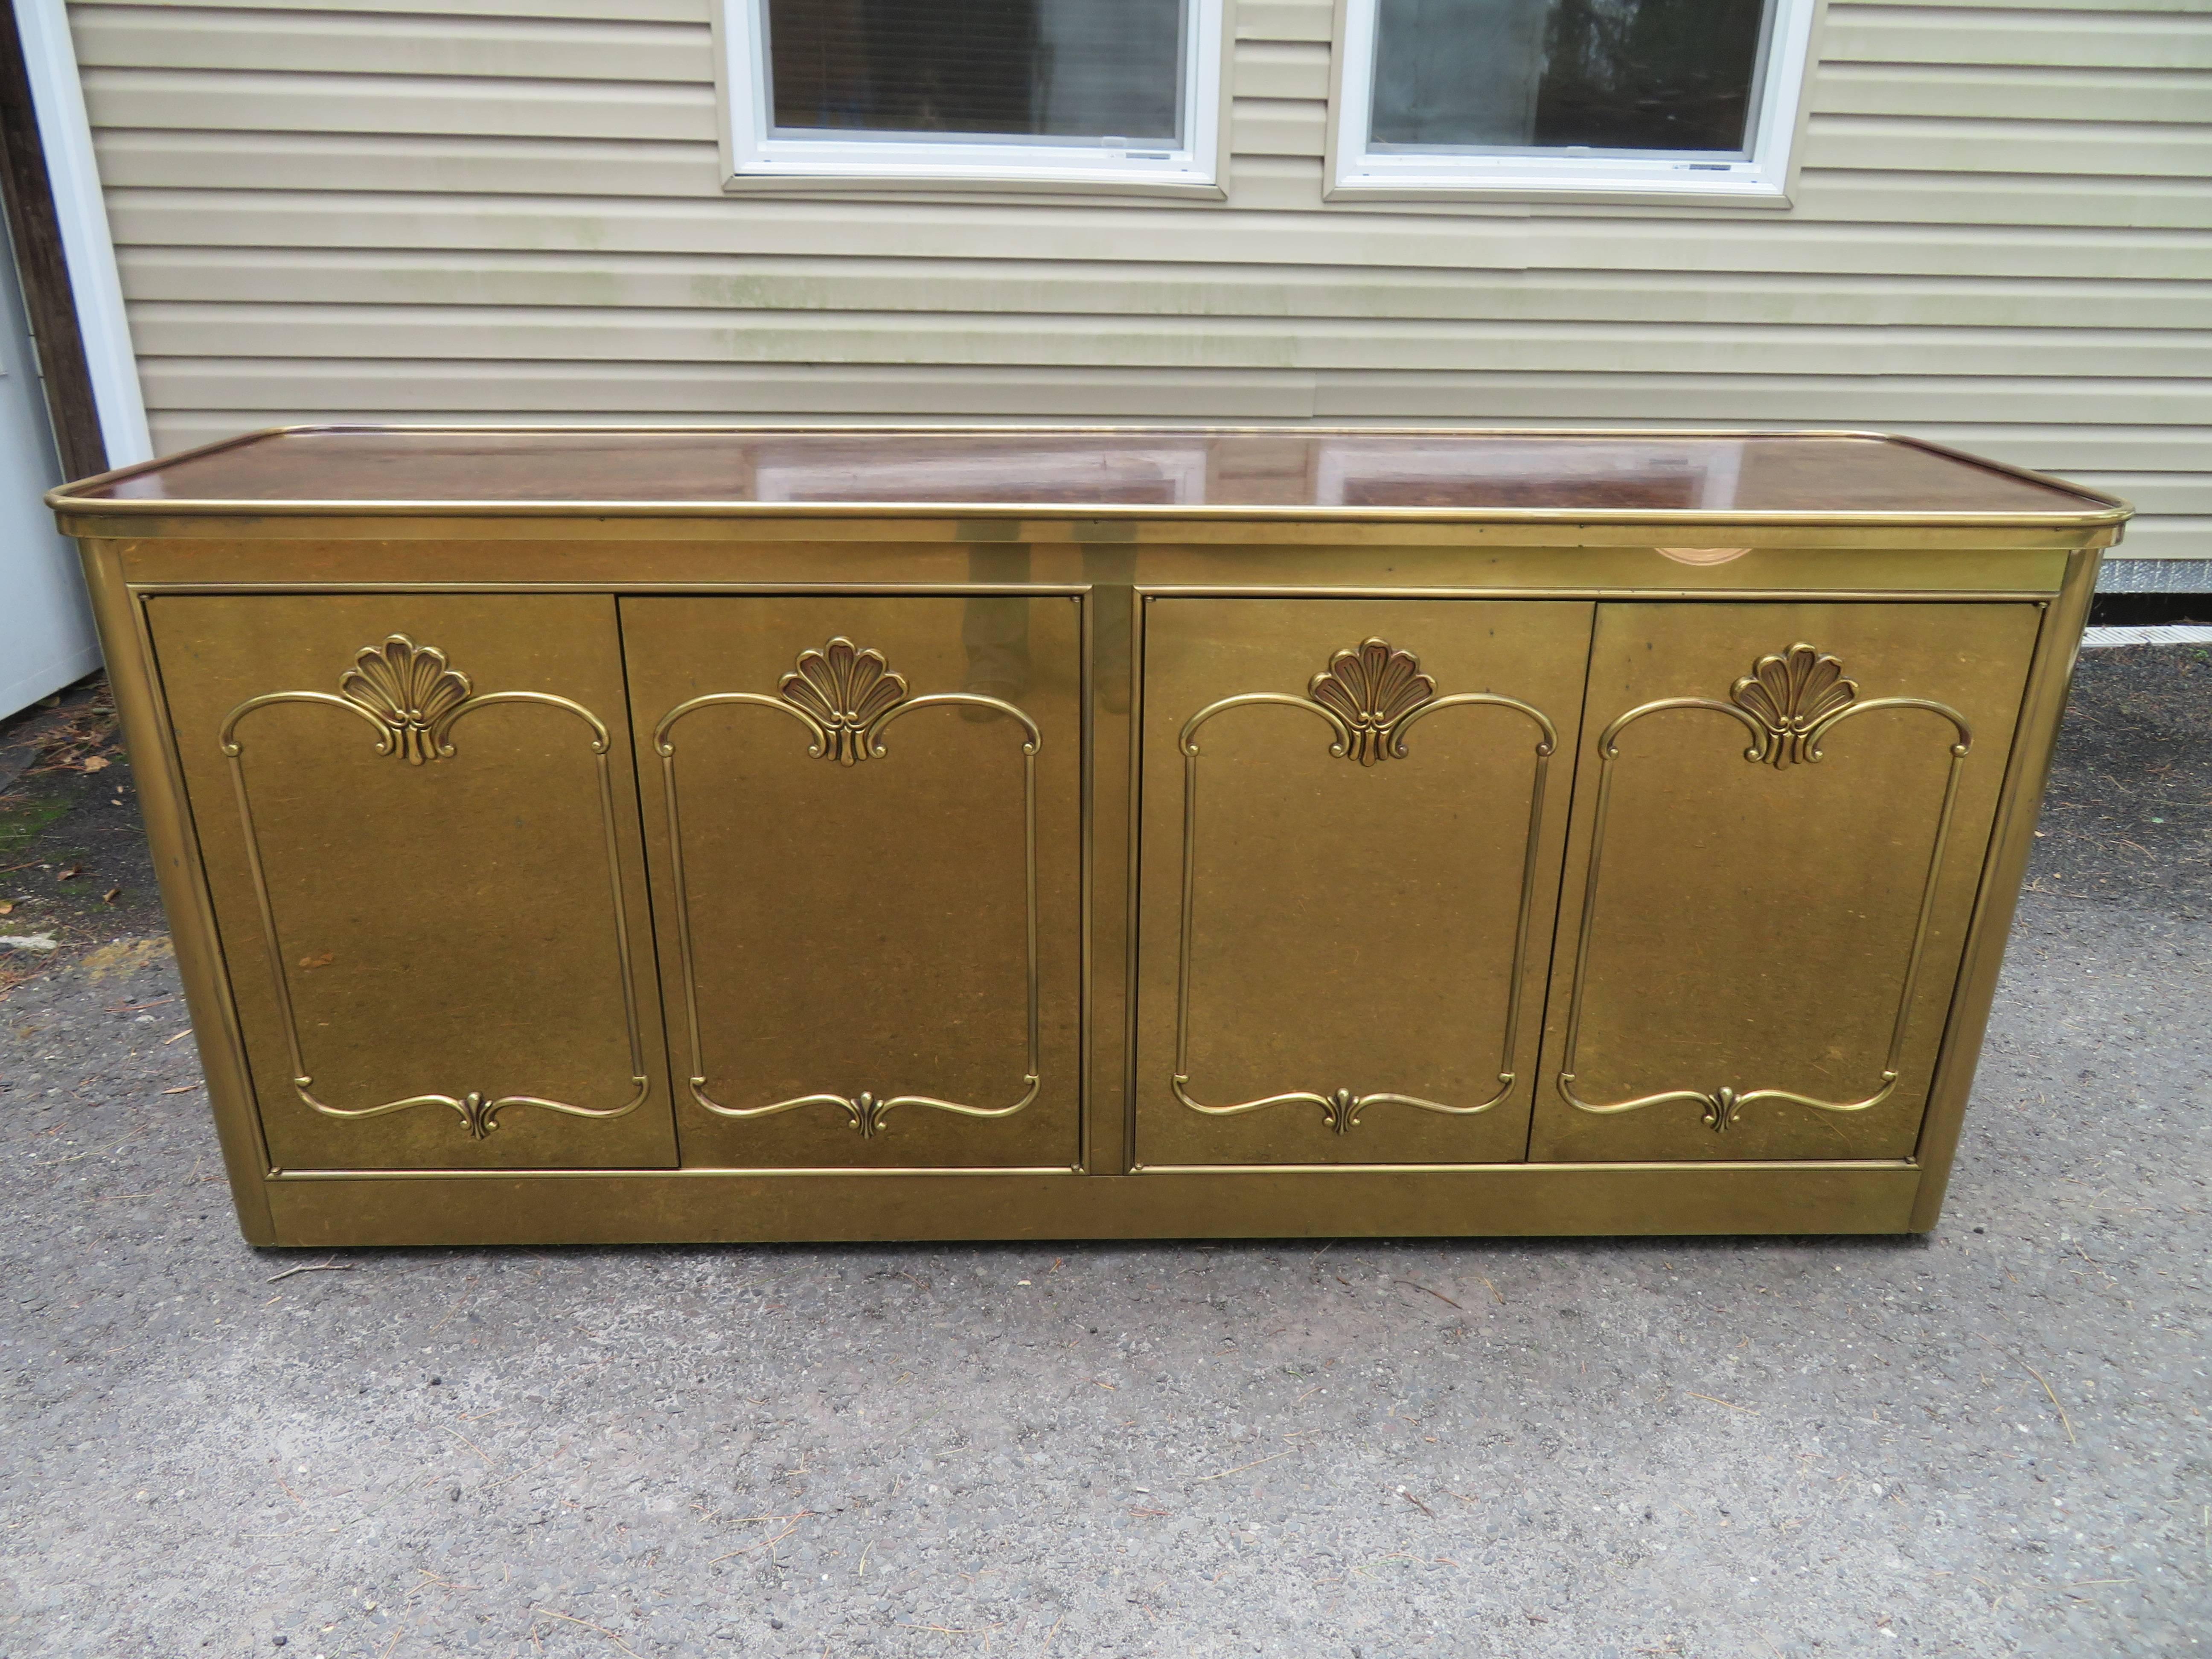 Absolutely stunning Mastercraft burled and brass credenza buffet. This is one of those pieces that stops you in your tracks as you marvel the vintage beauty of this piece. We love the antiqued finish of the brass along with the dark burled top. We